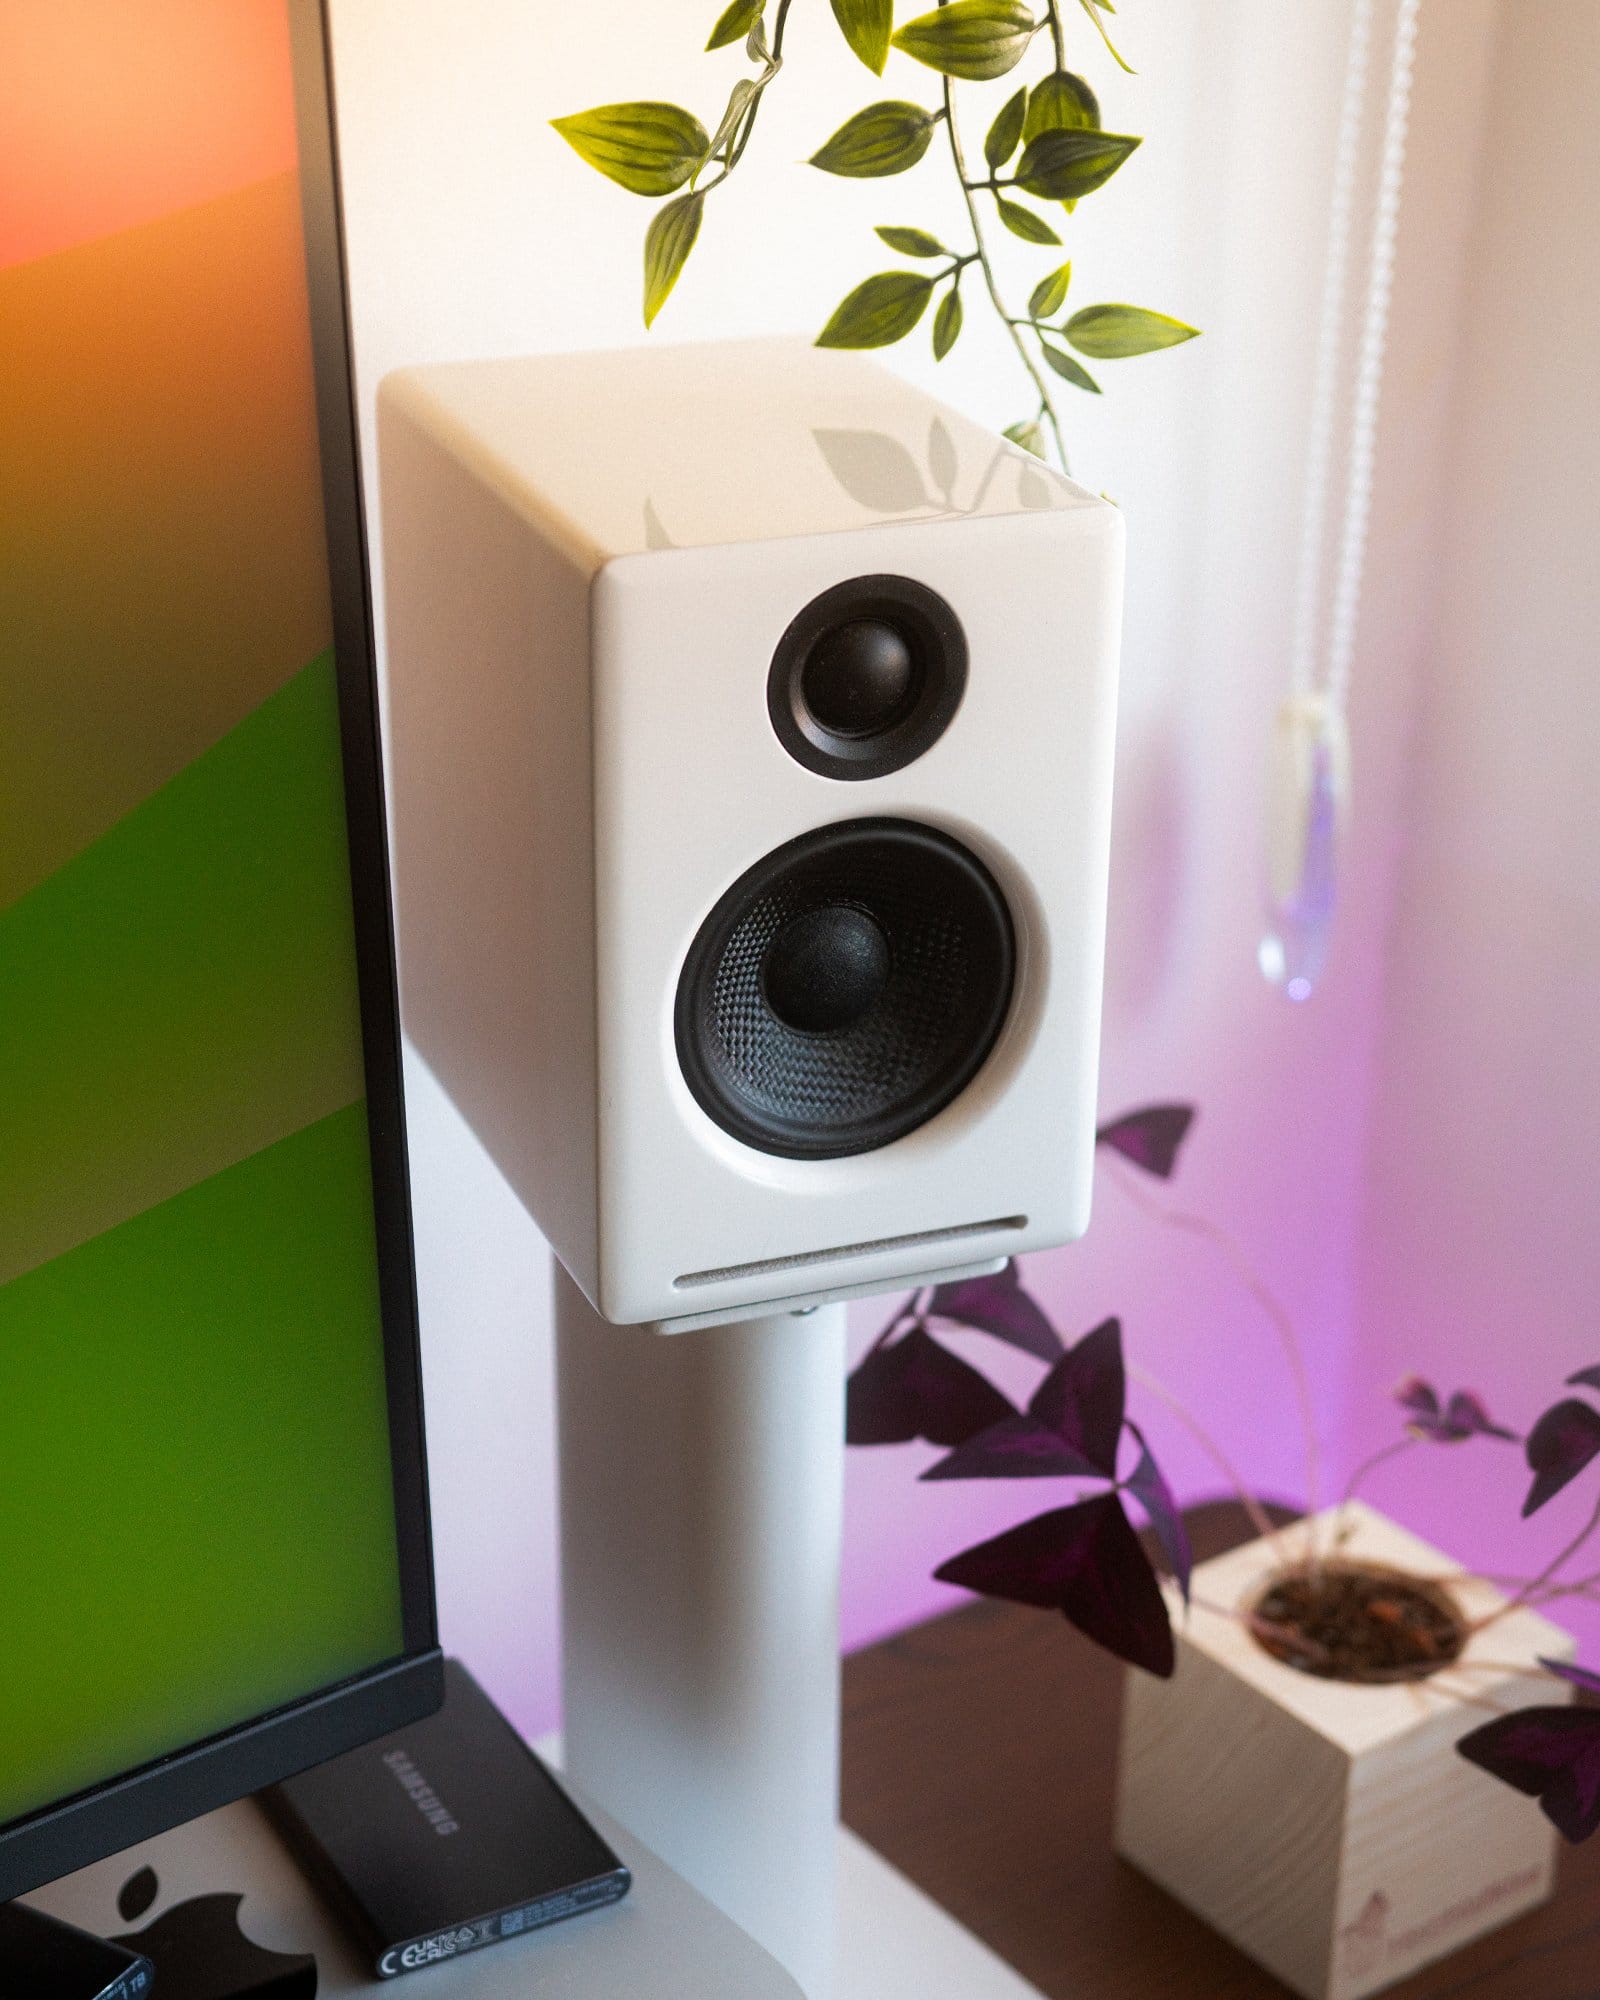  An Audioengine speaker perched next to a monitor, with its clean white design complementing the vibrant houseplants and ambient coloured lighting in the space